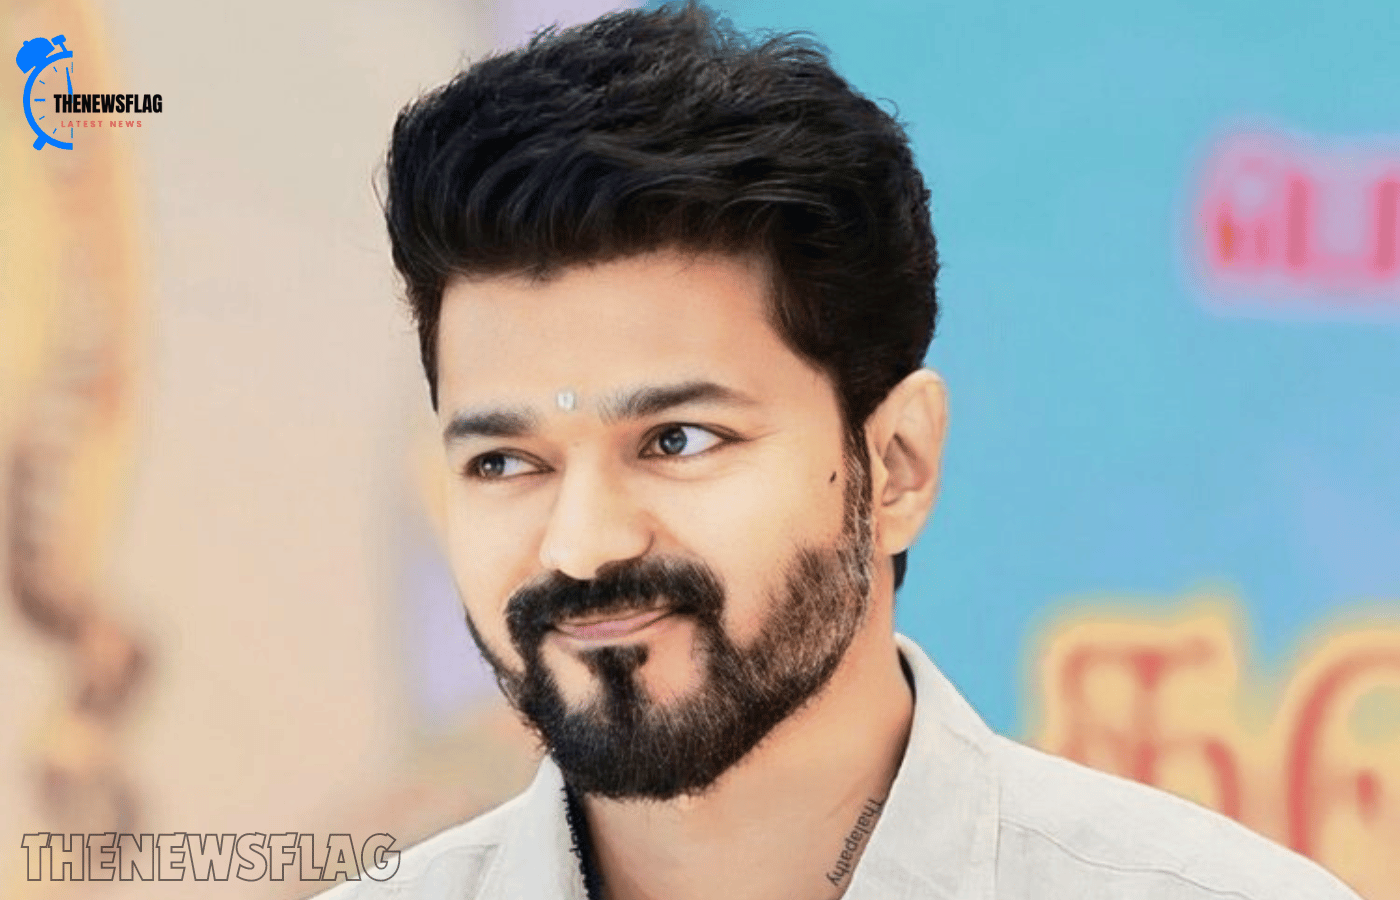 Actor Thalapathy Vijay responds, "It is not," to the CAA notification.